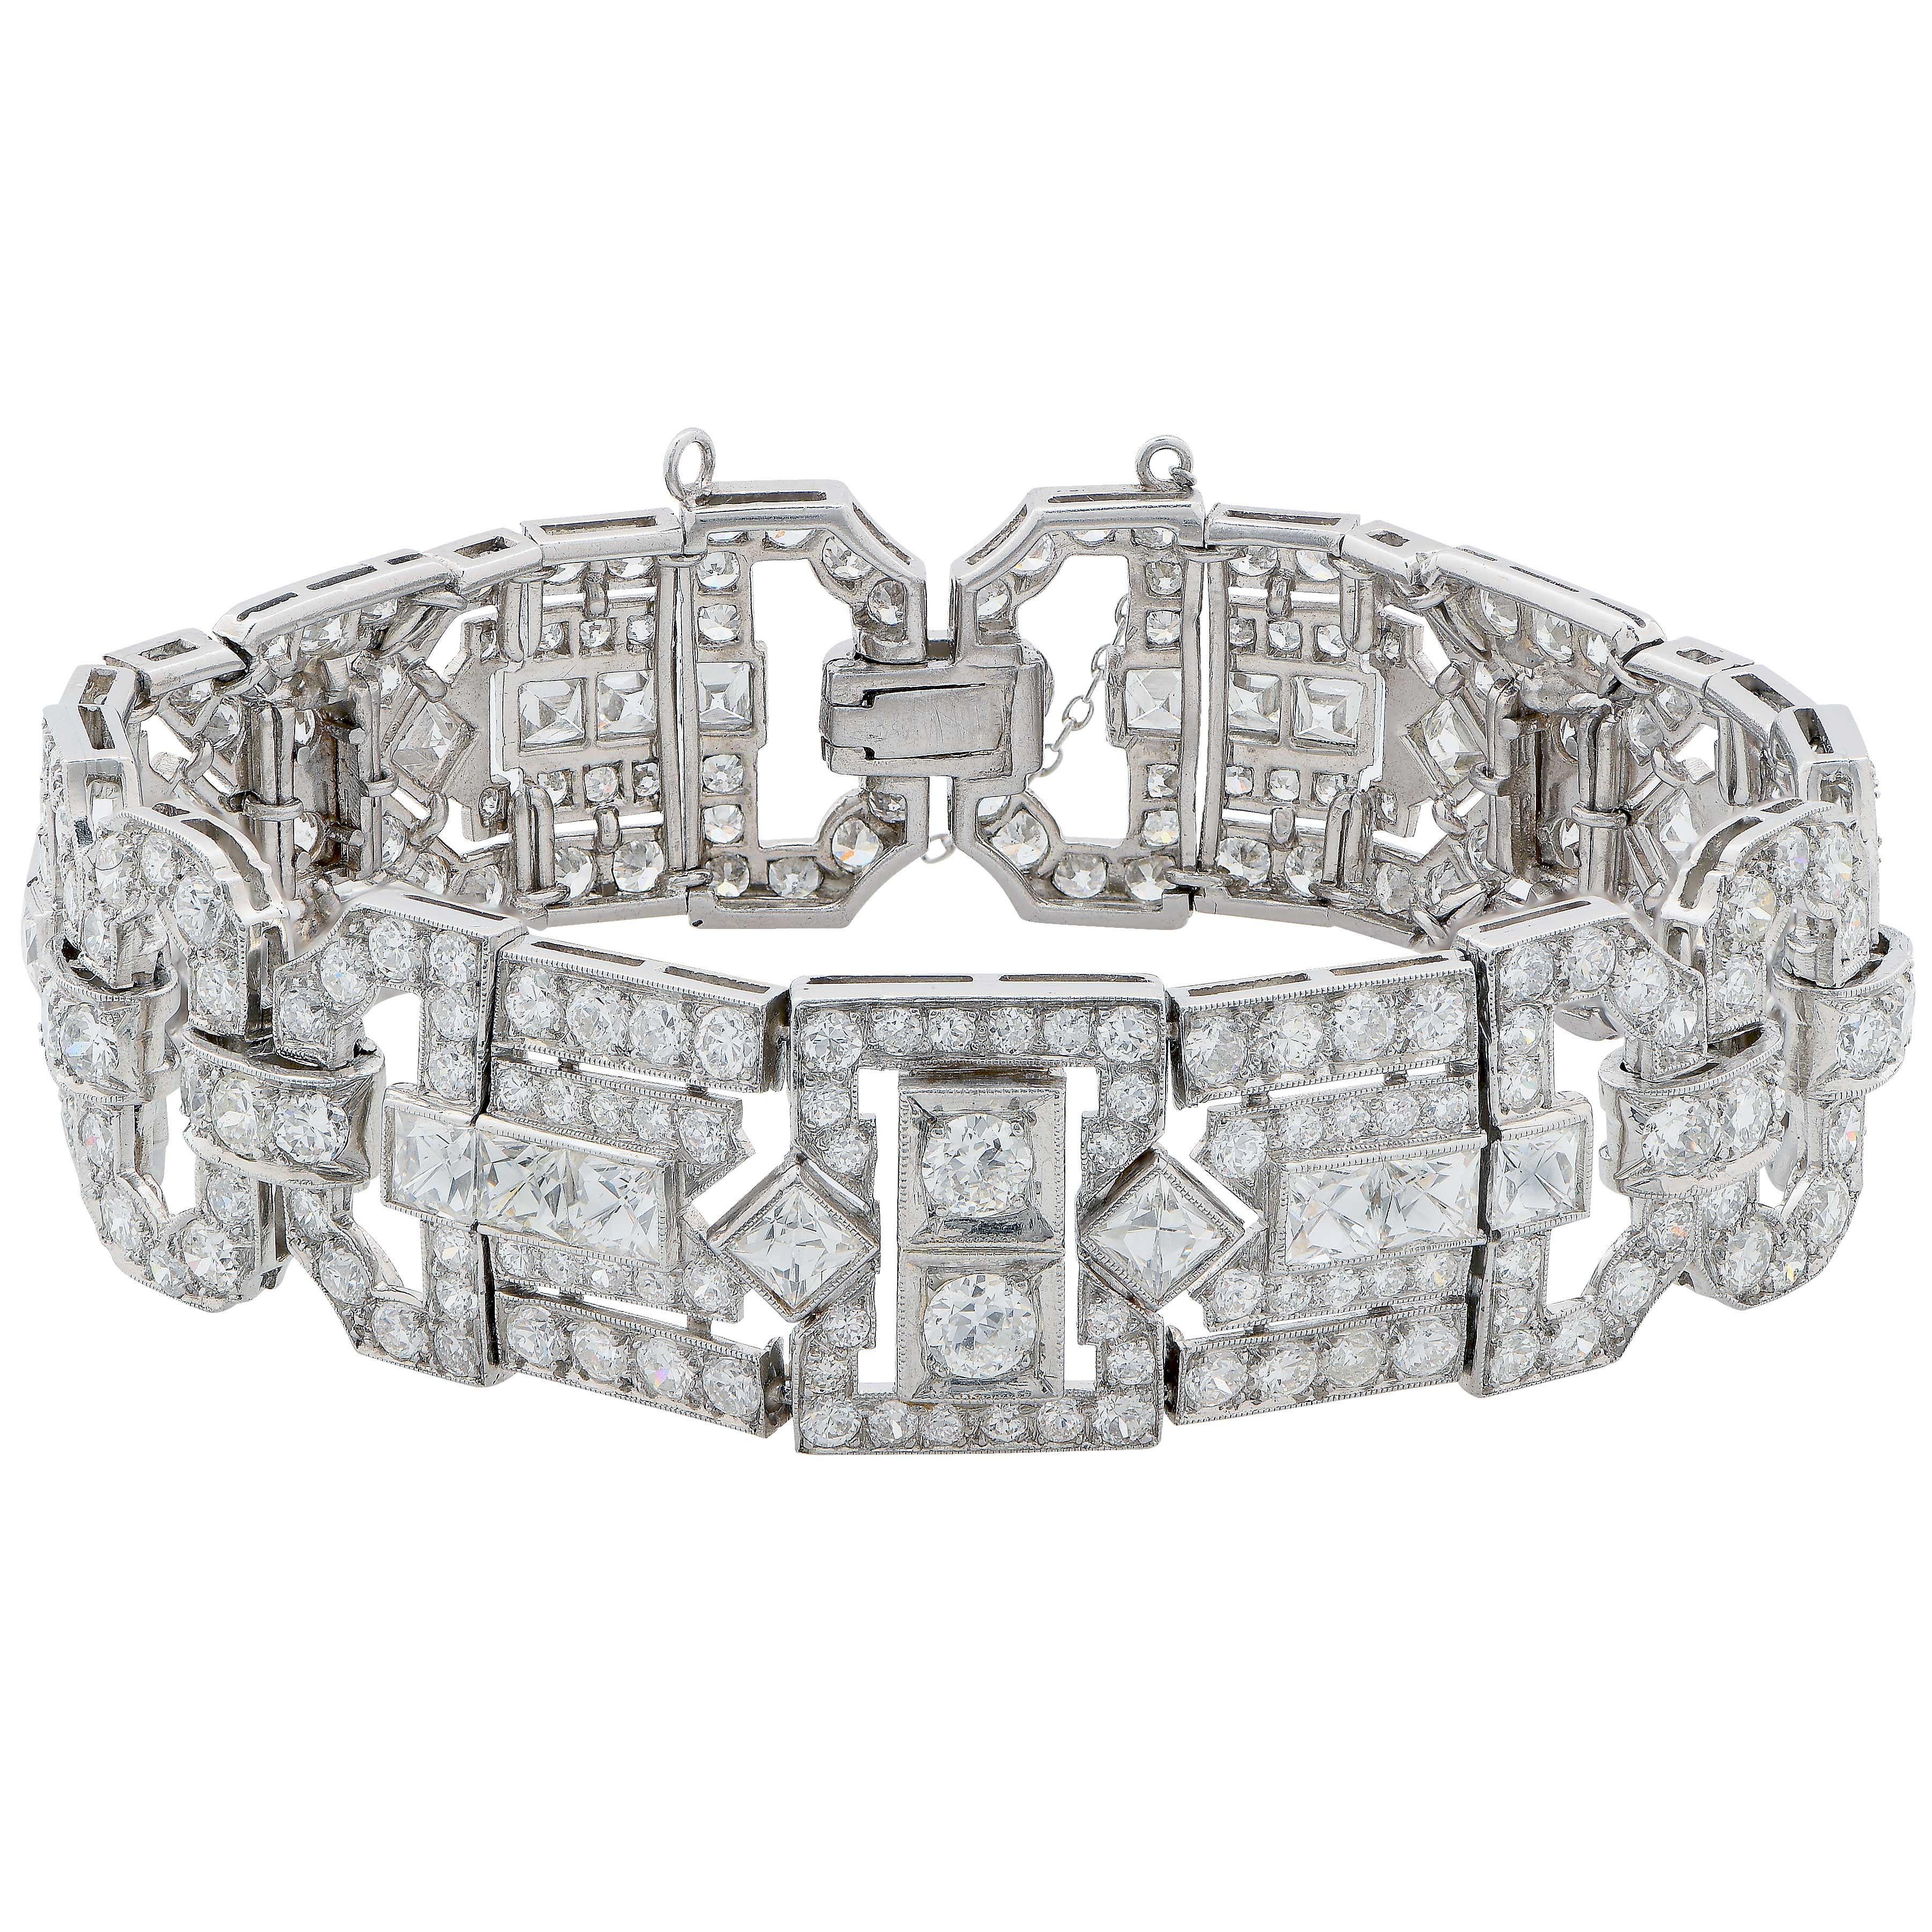 Deco Style Bracelet featuring 266 mix cut diamonds with and estimated total weight of 12 Carats.
Metal Type: Platinum
Metal Weight: 38.9 Grams